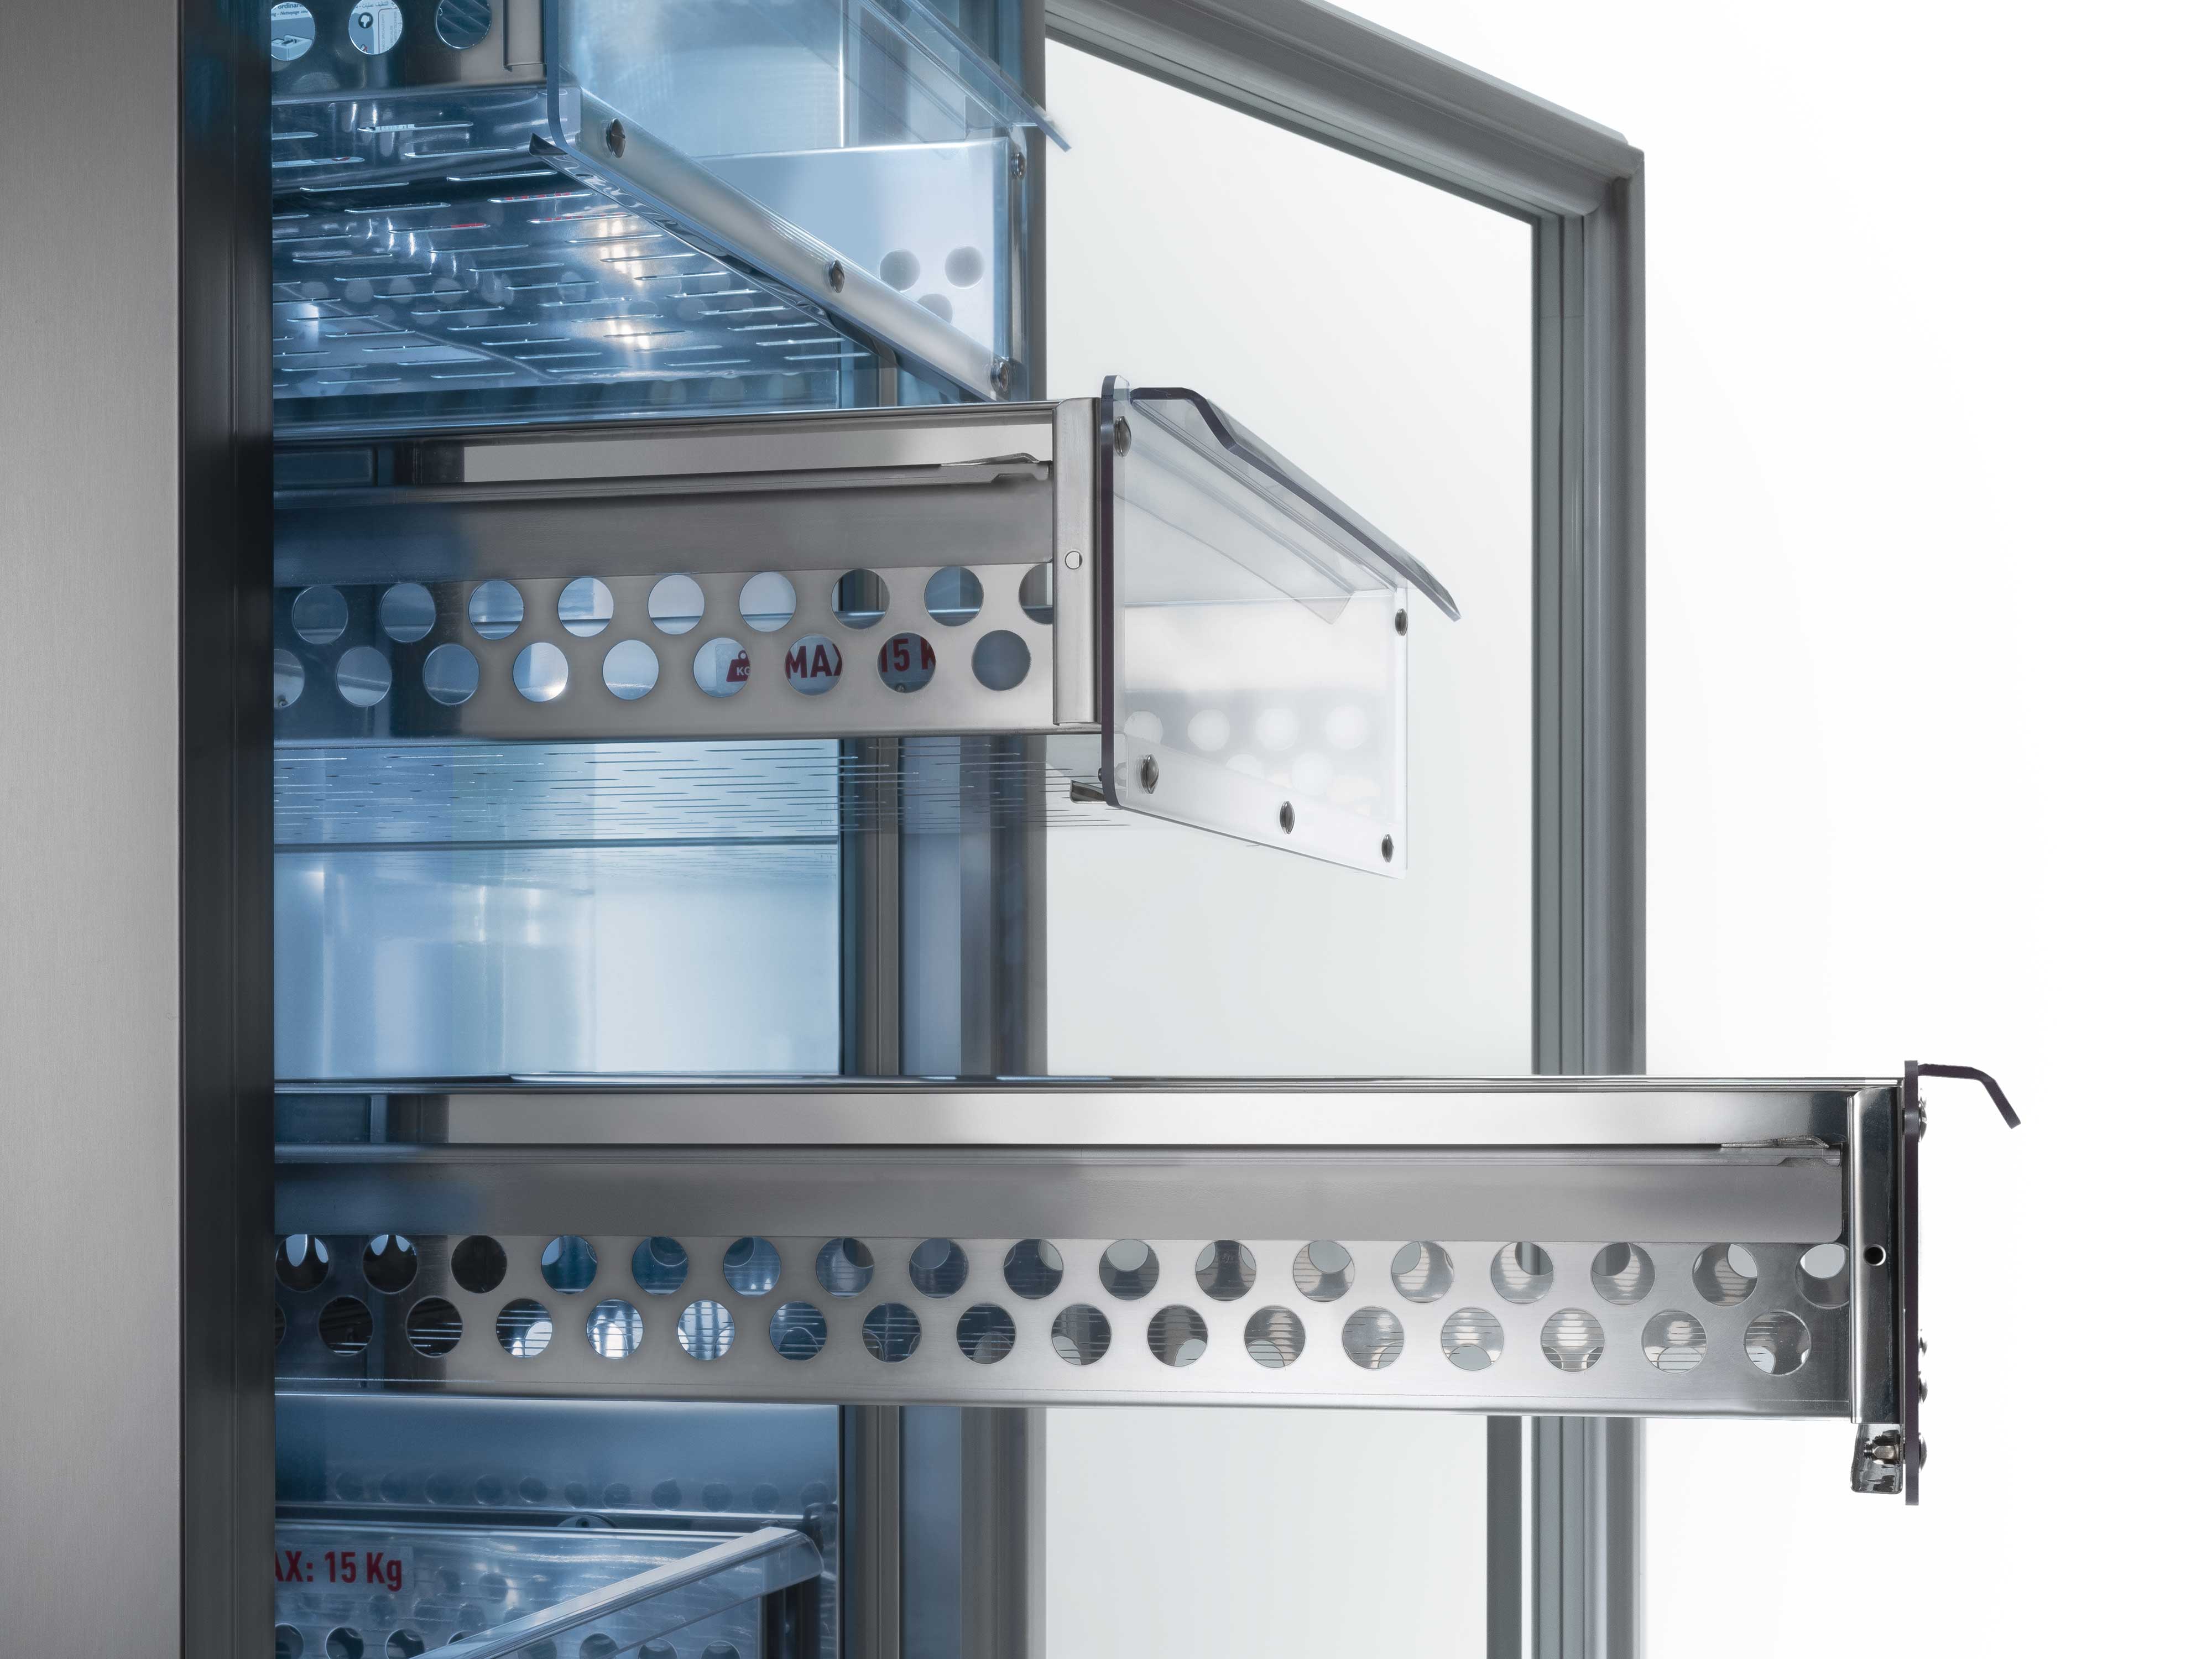  Refrigerated cabinets